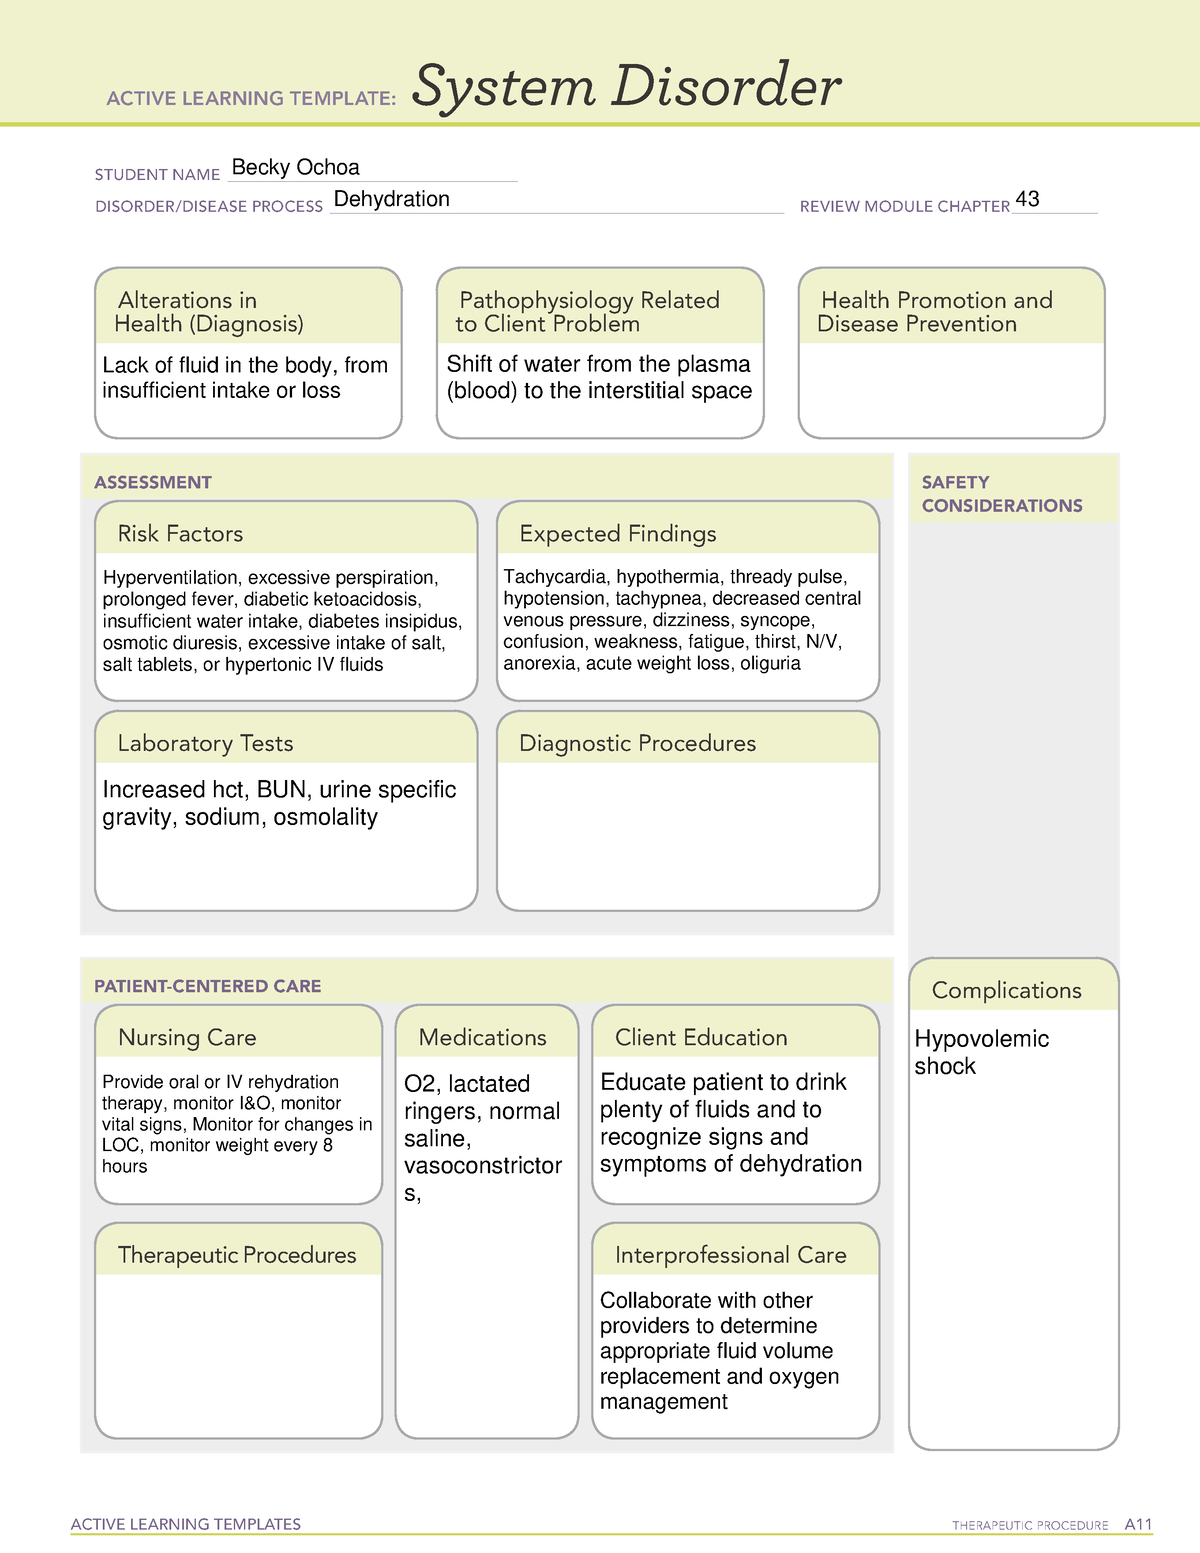 ati-system-disorder-template-dehydration-active-learning-templates